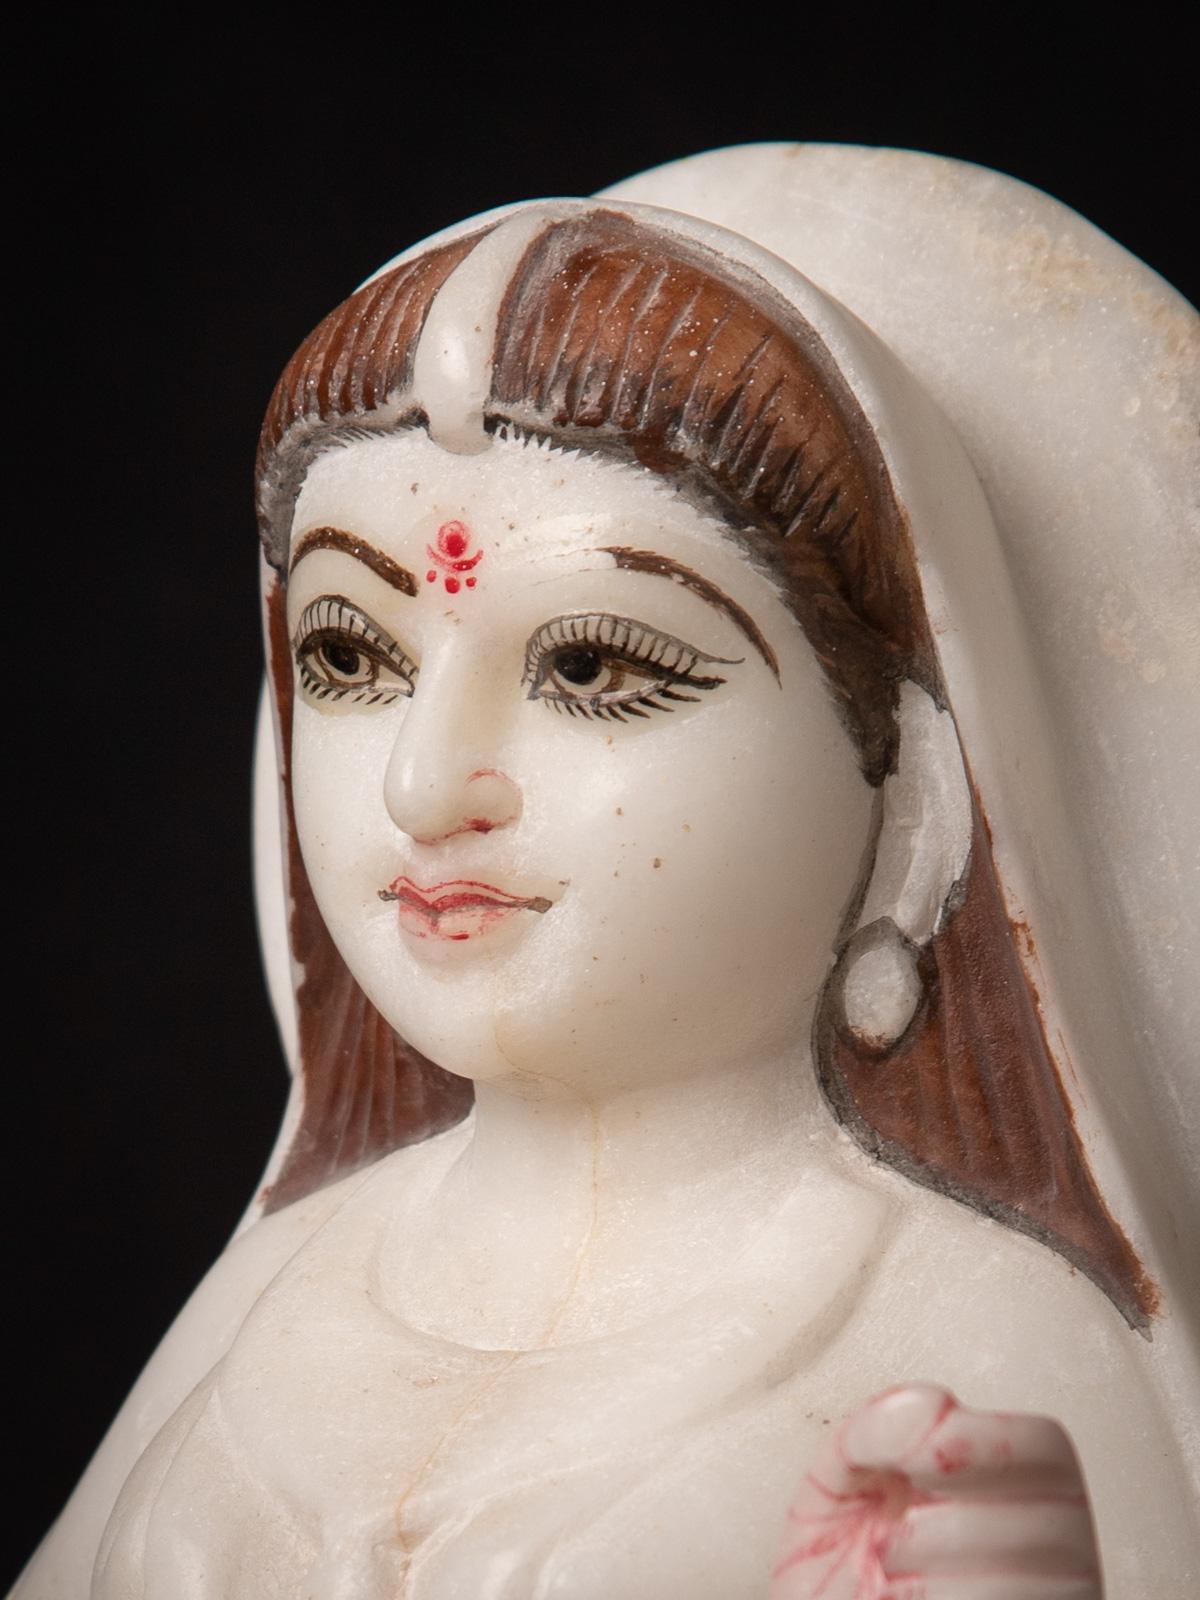 Middle 20th century Old Indian marble Khodiyar mata statue from India  2